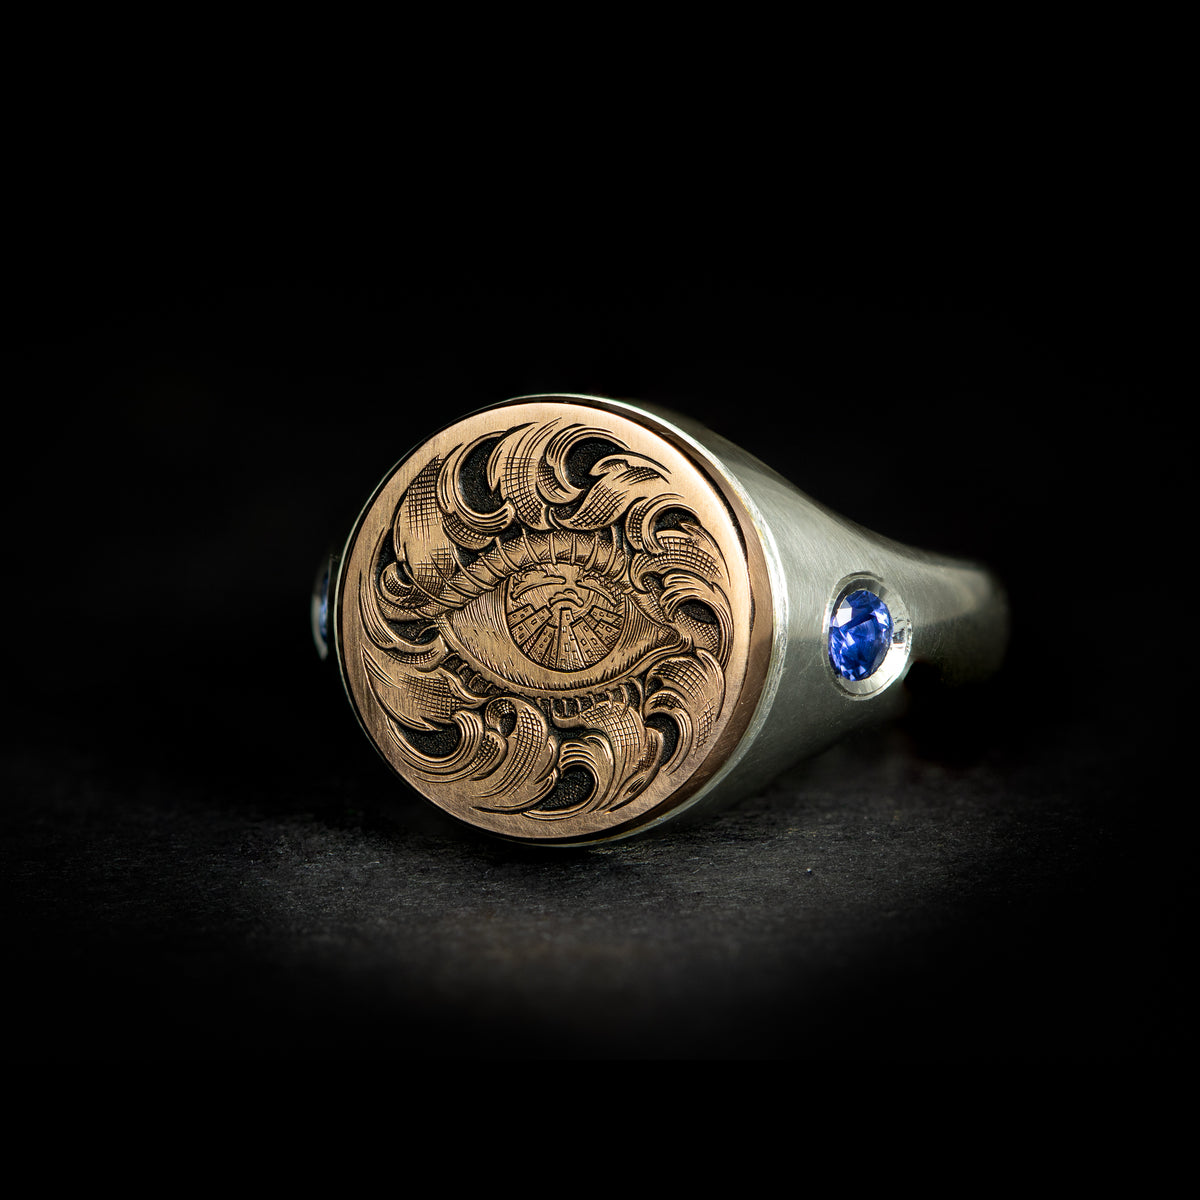 Hand engraved jewellery round signet ring with fantasy leaf scroll work around an eye with city scape in iris. Shoulder set with blue sapphires. Made in 9 carat rose gold and silver. On black background angled shot.